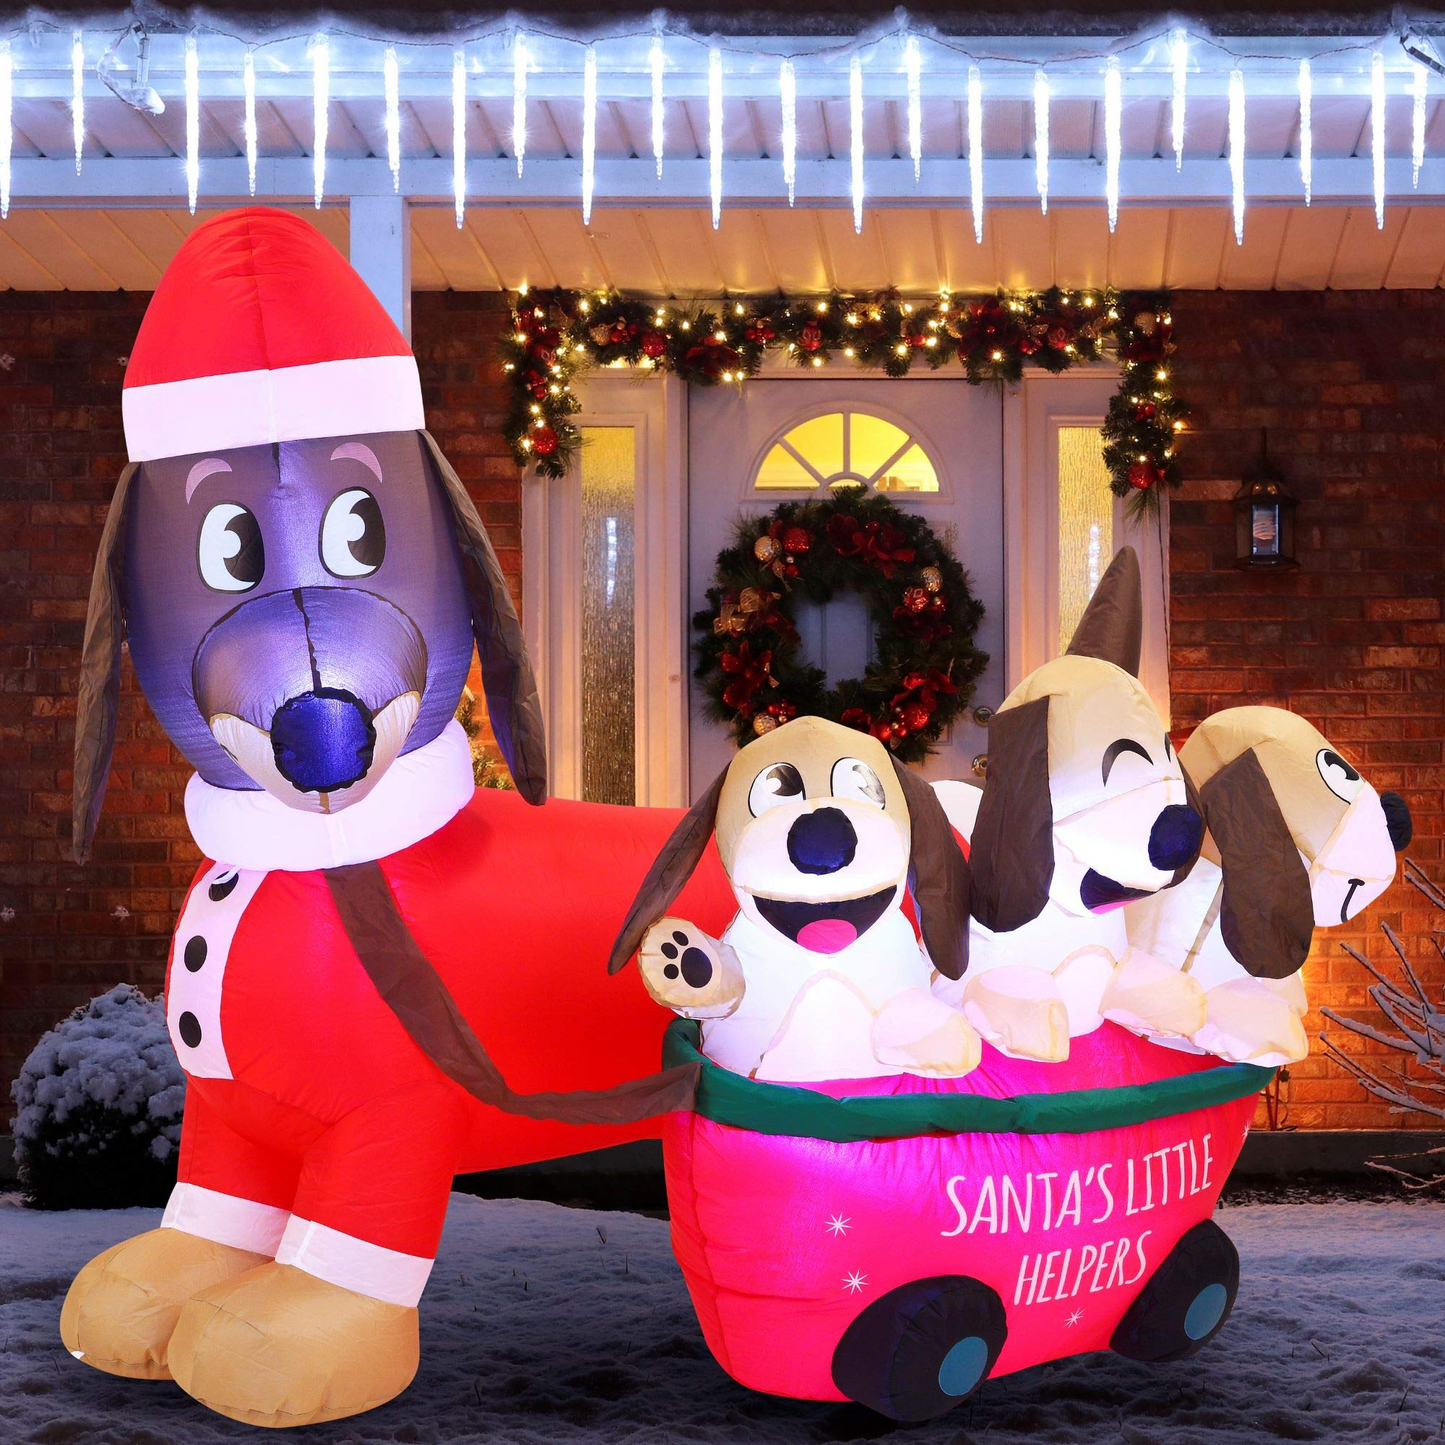 Tall Christmas Puppy Inflatable (5 ft)